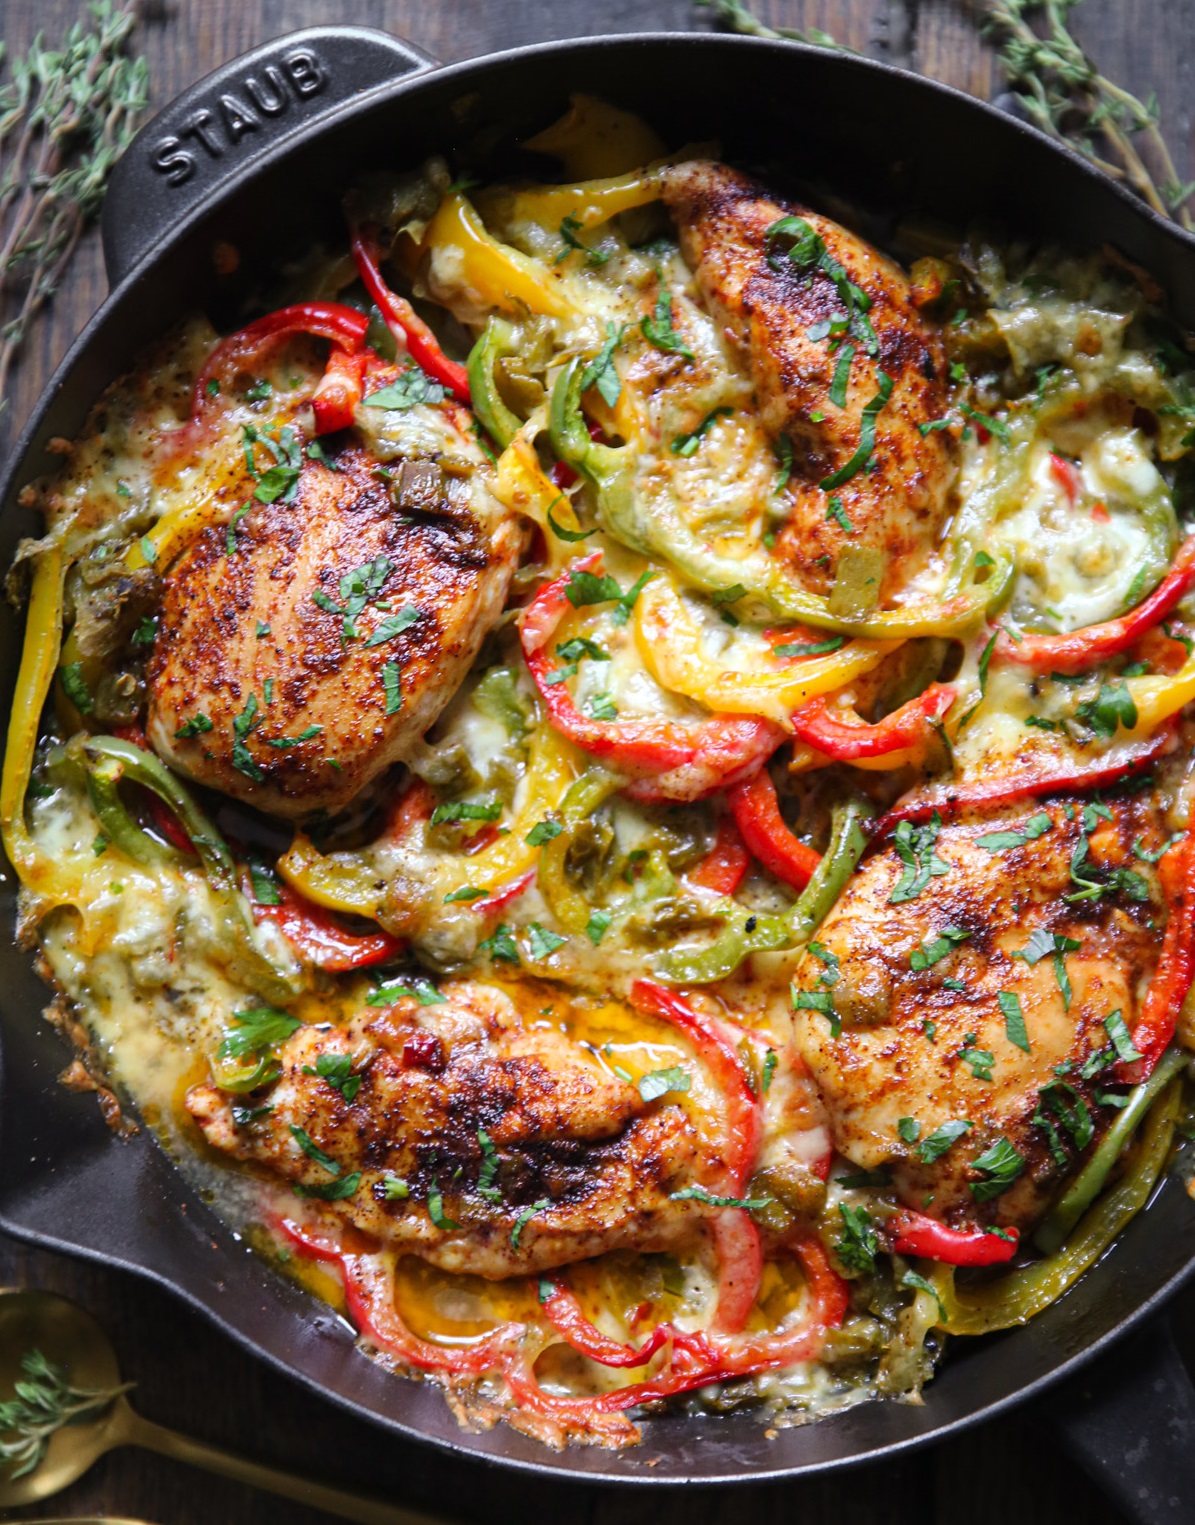 Fajita Chicken Bake with Bell Peppers and Pepper Jack Cheese